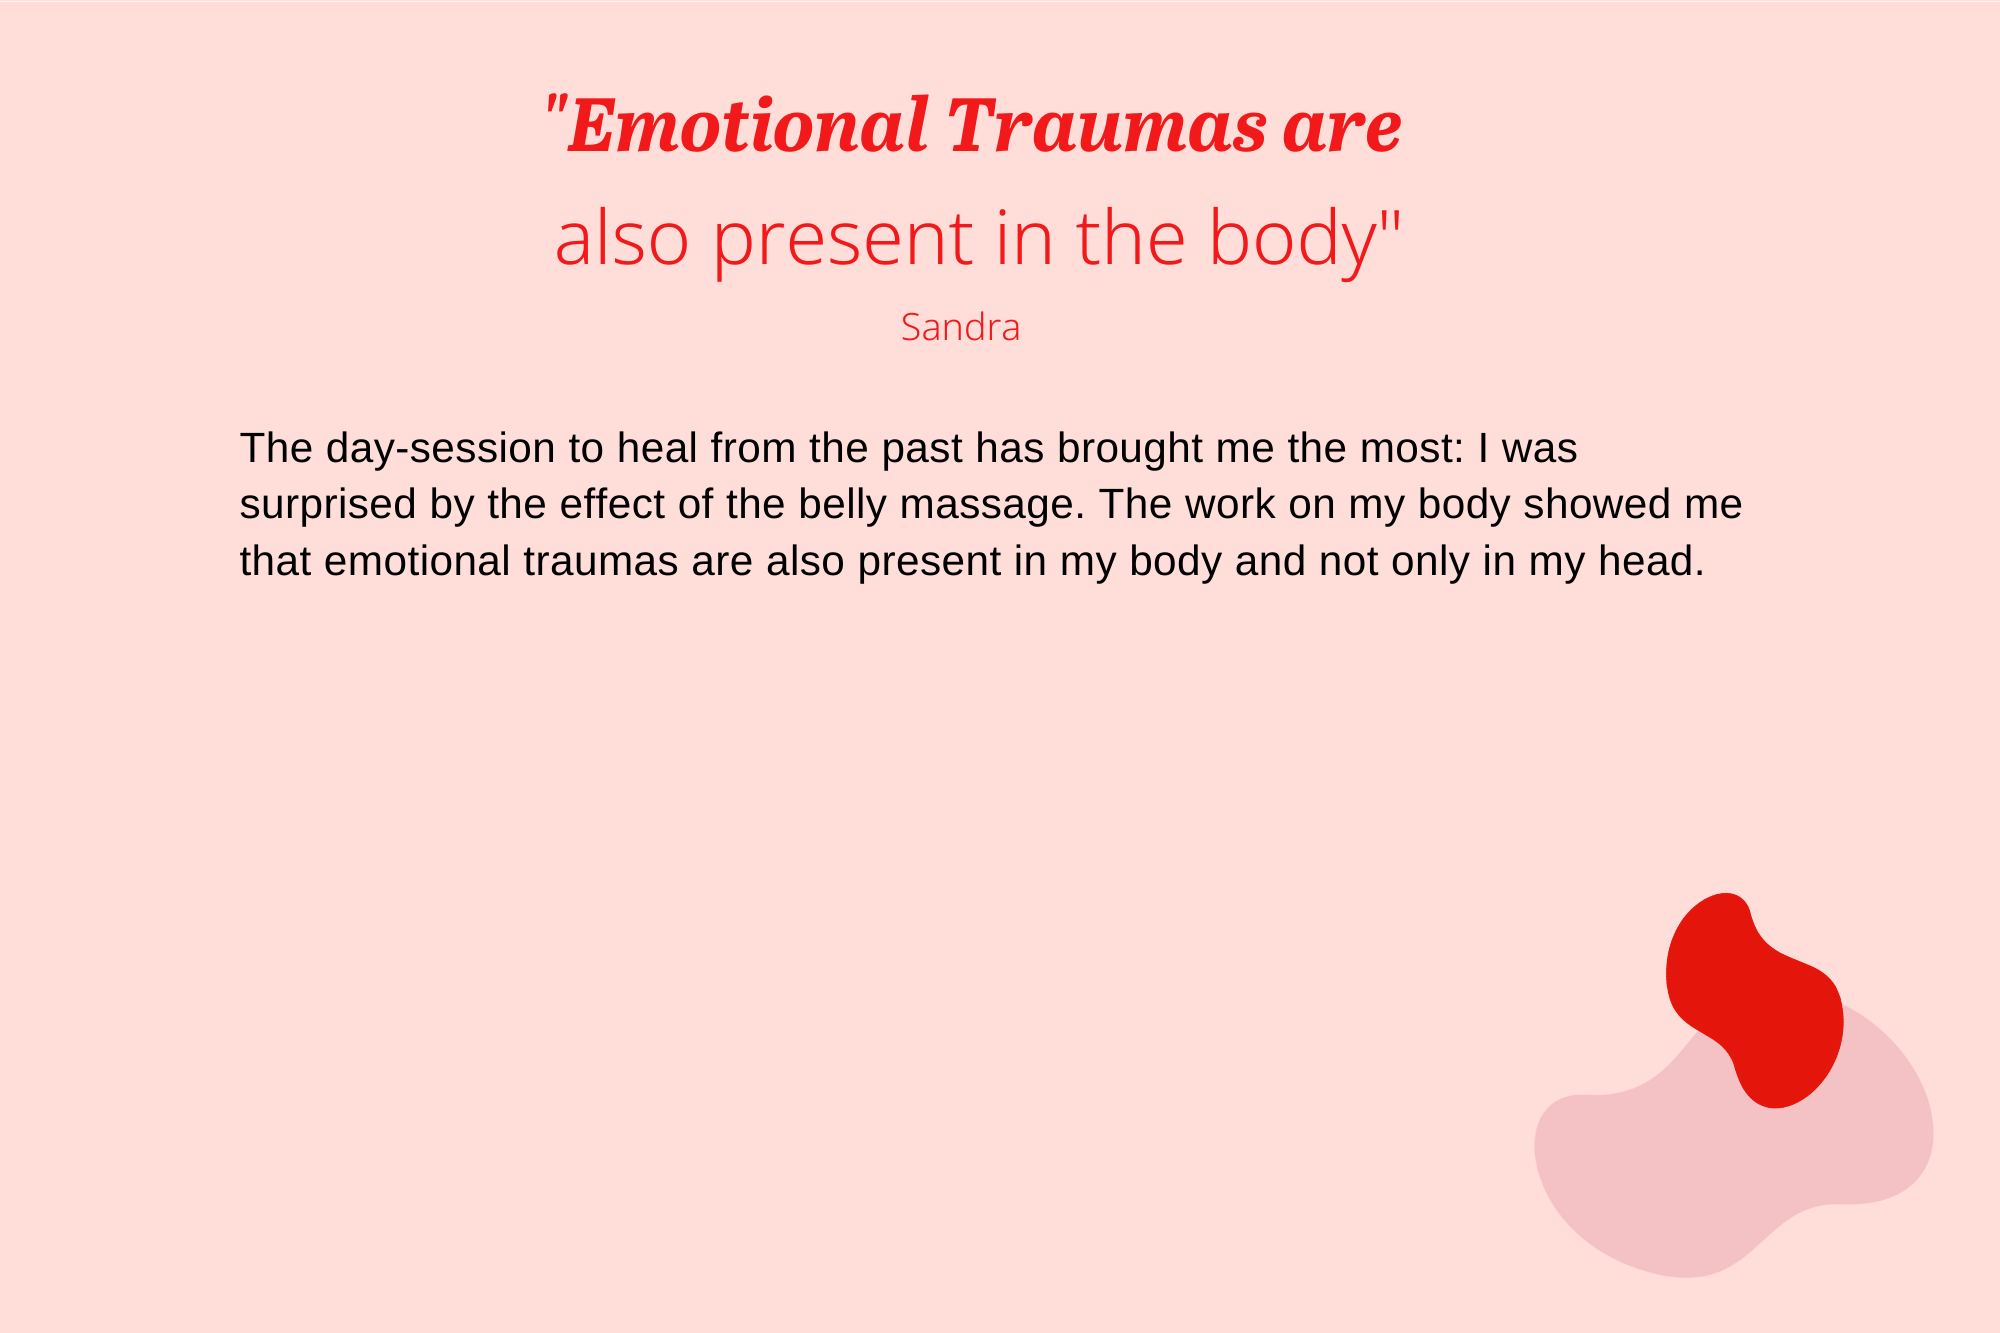 EN_Testimonials_lovecoach_Emotional Traumas are also present in the body